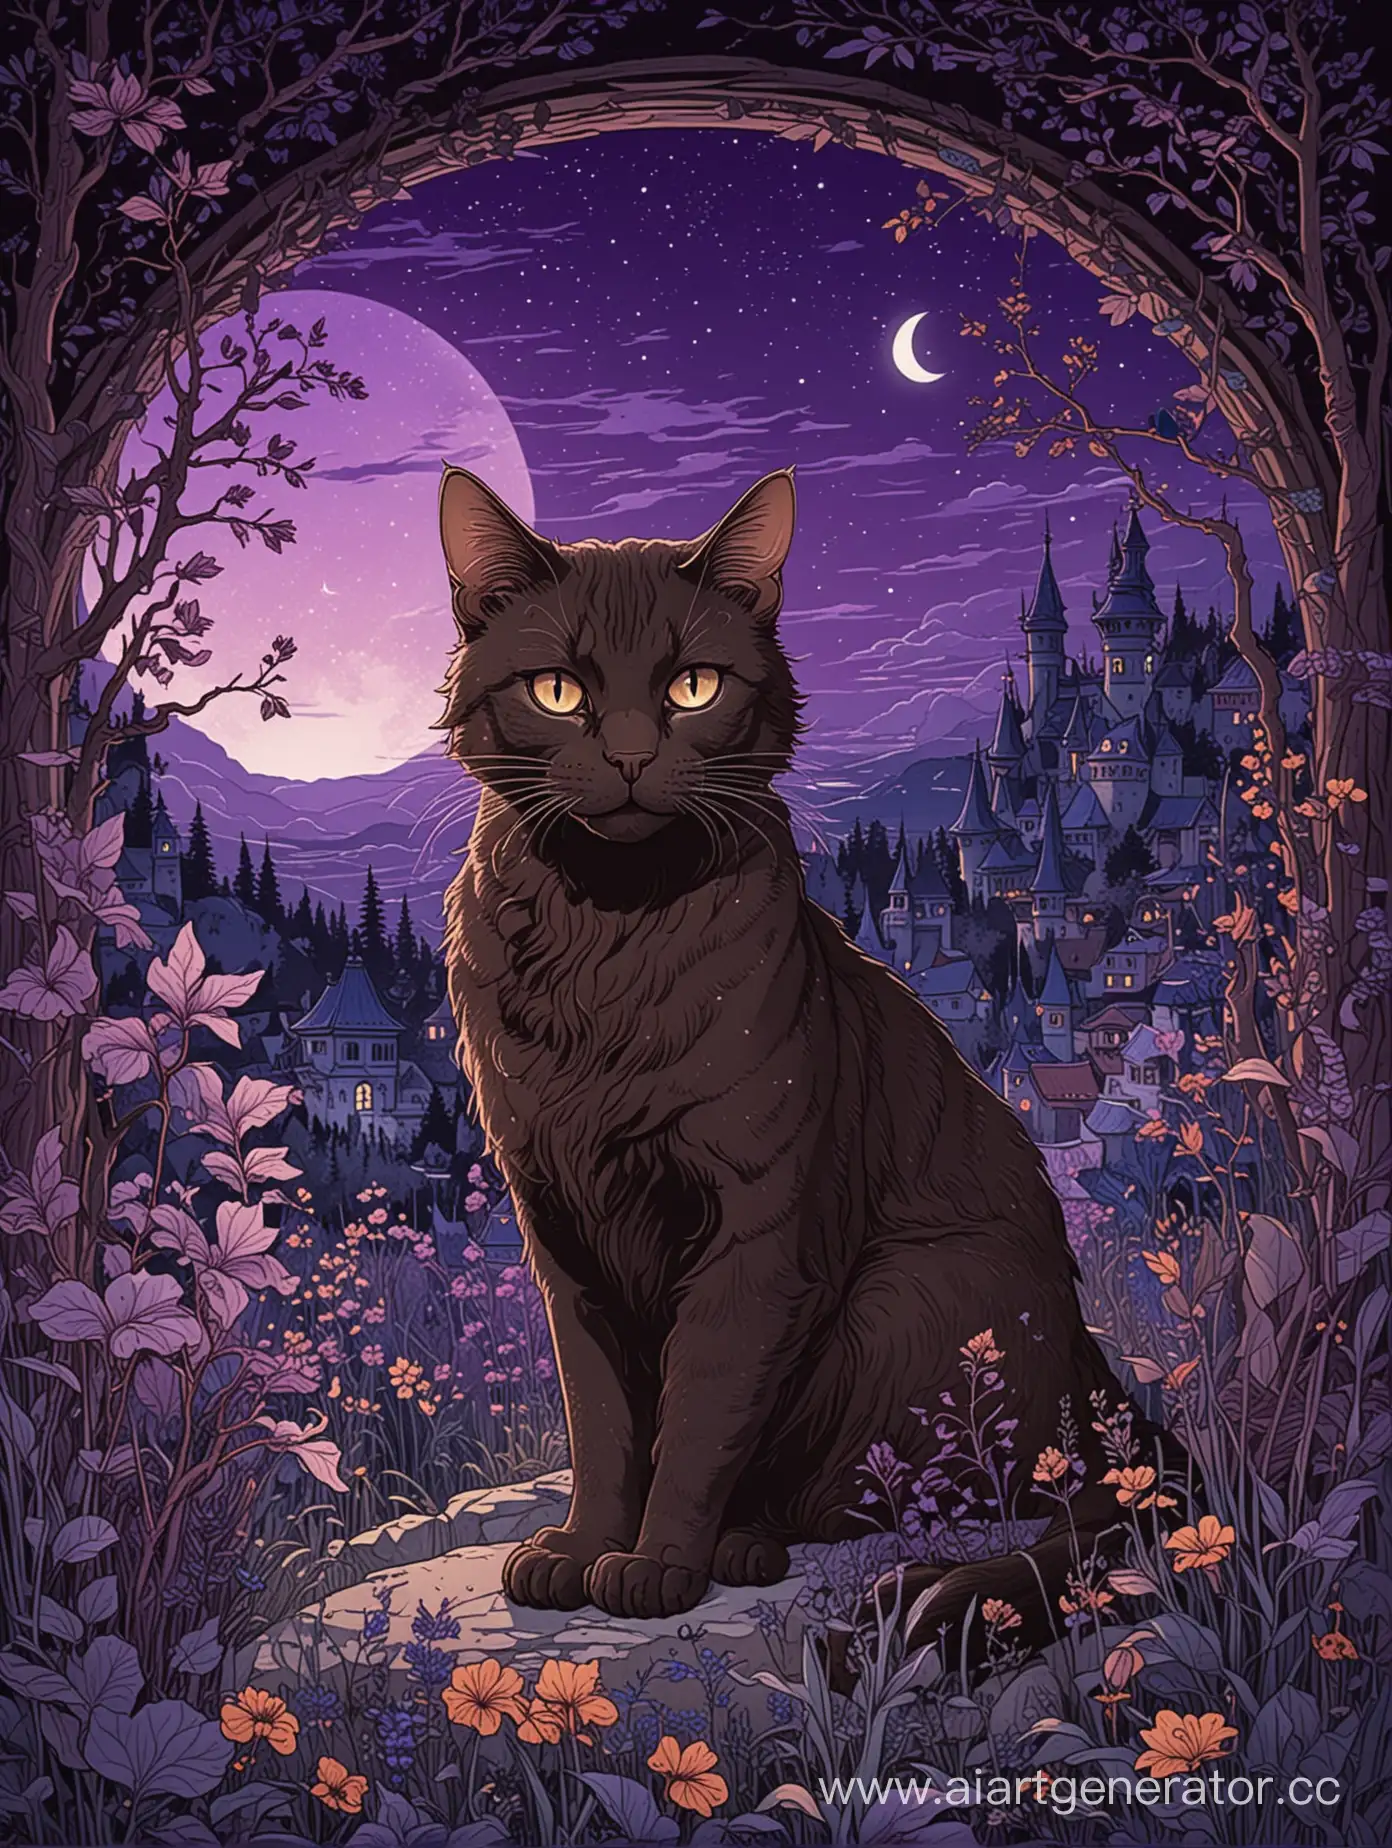 Illustration for a fairy tale in the style of Bilibin, purple night background, dark brown cat's face 